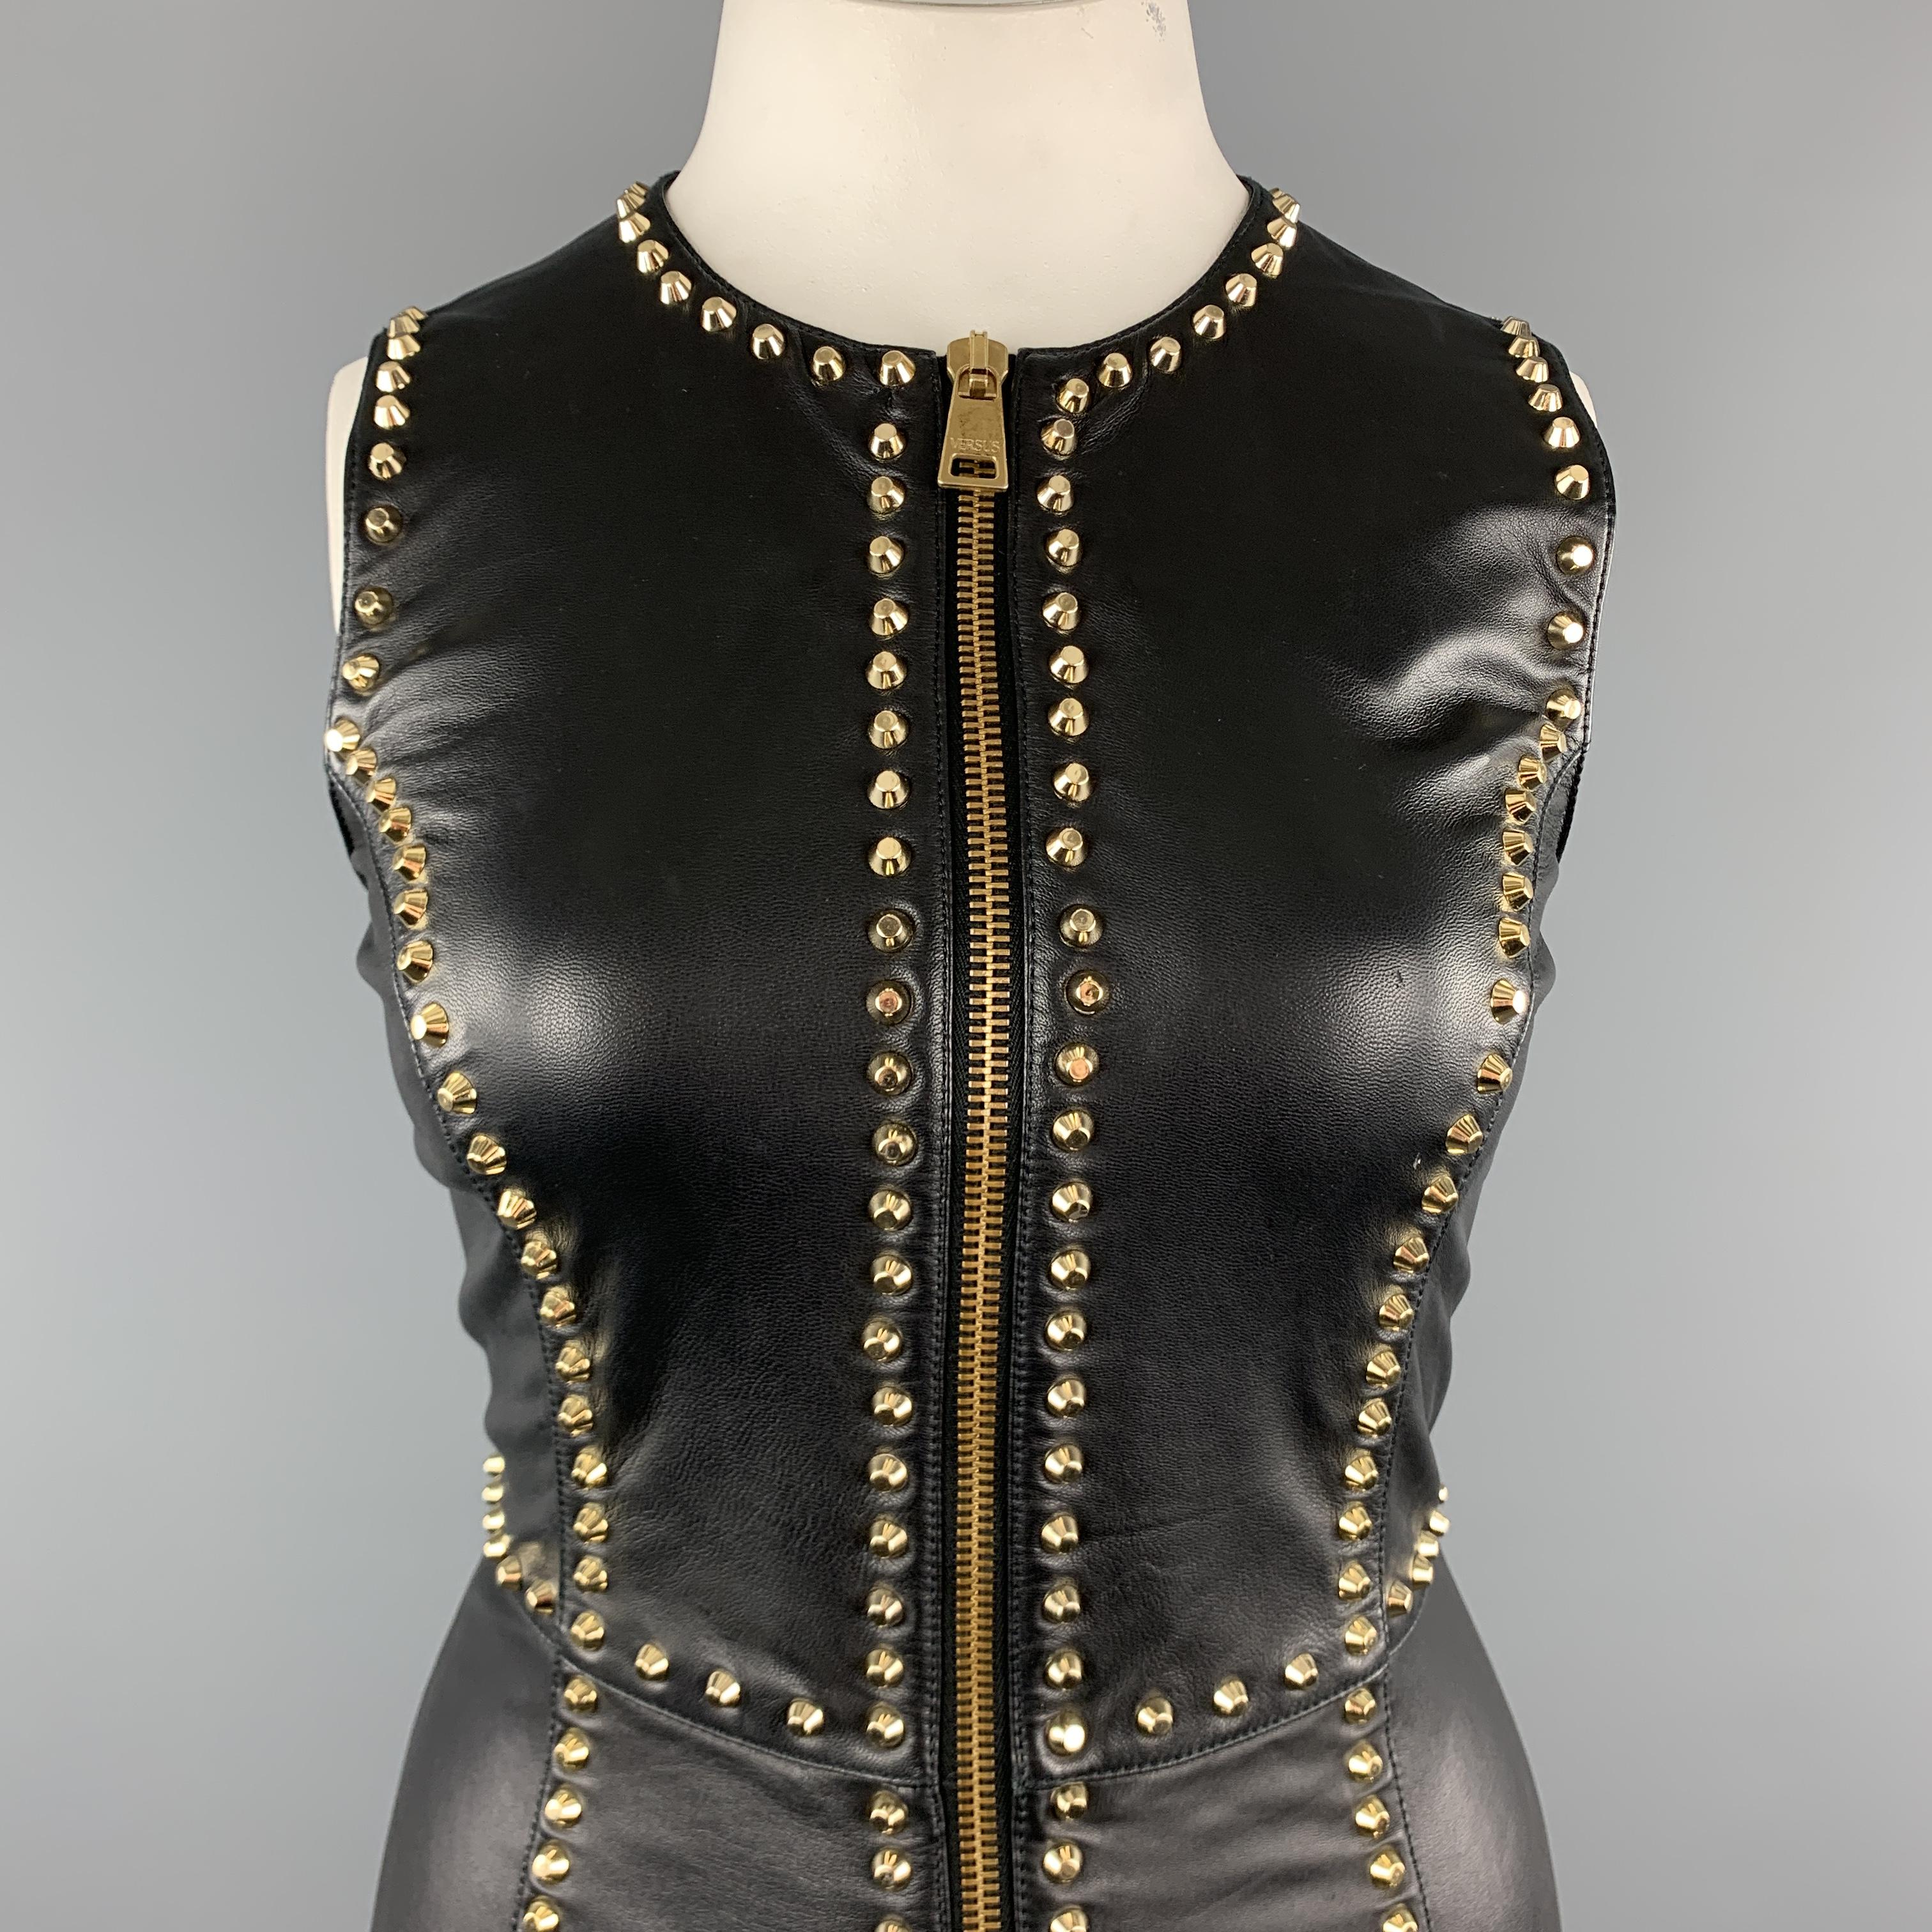 VERSUS by GIANNI VERSACE sleeveless sheath dress comes in smooth black leather with gold tone studded trim throughout and zip up front. 

Excellent Pre-Owned Condition.
Marked: (no size)

Measurements:

Shoulder: 13 in.
Bust: 36 in.
Waist: 30